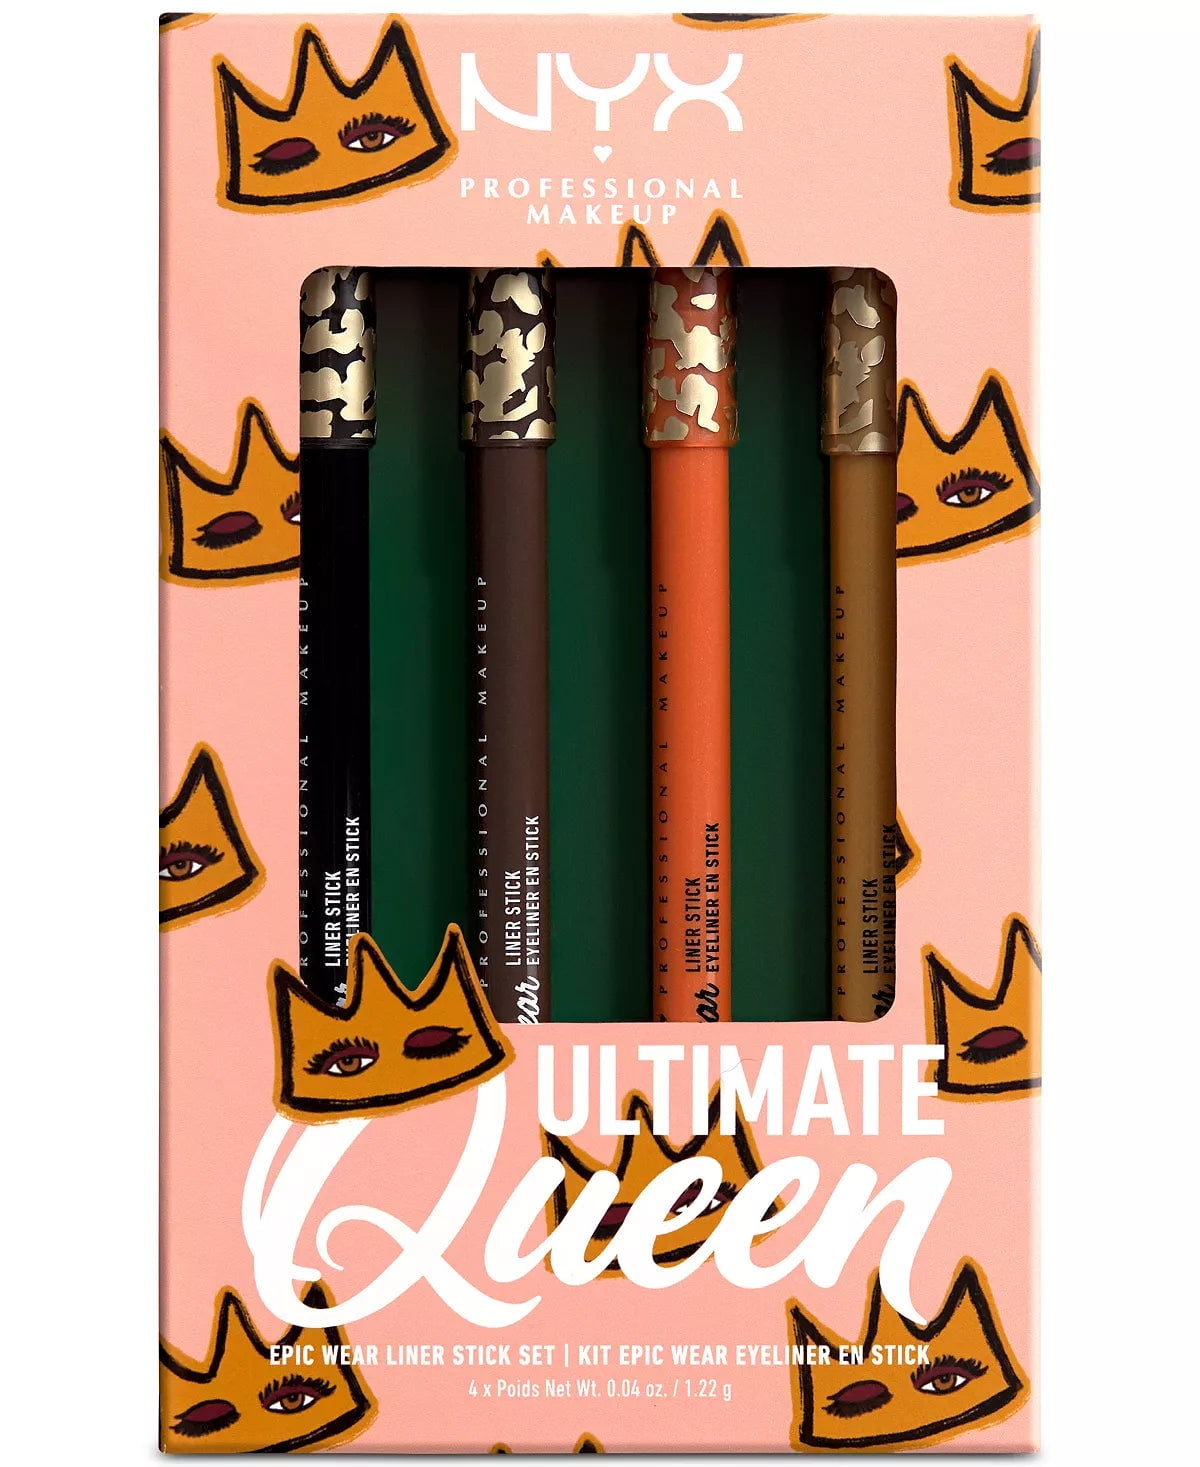 Ultimate NYX Queen Kit Wear Epic Makeup Professional Liner